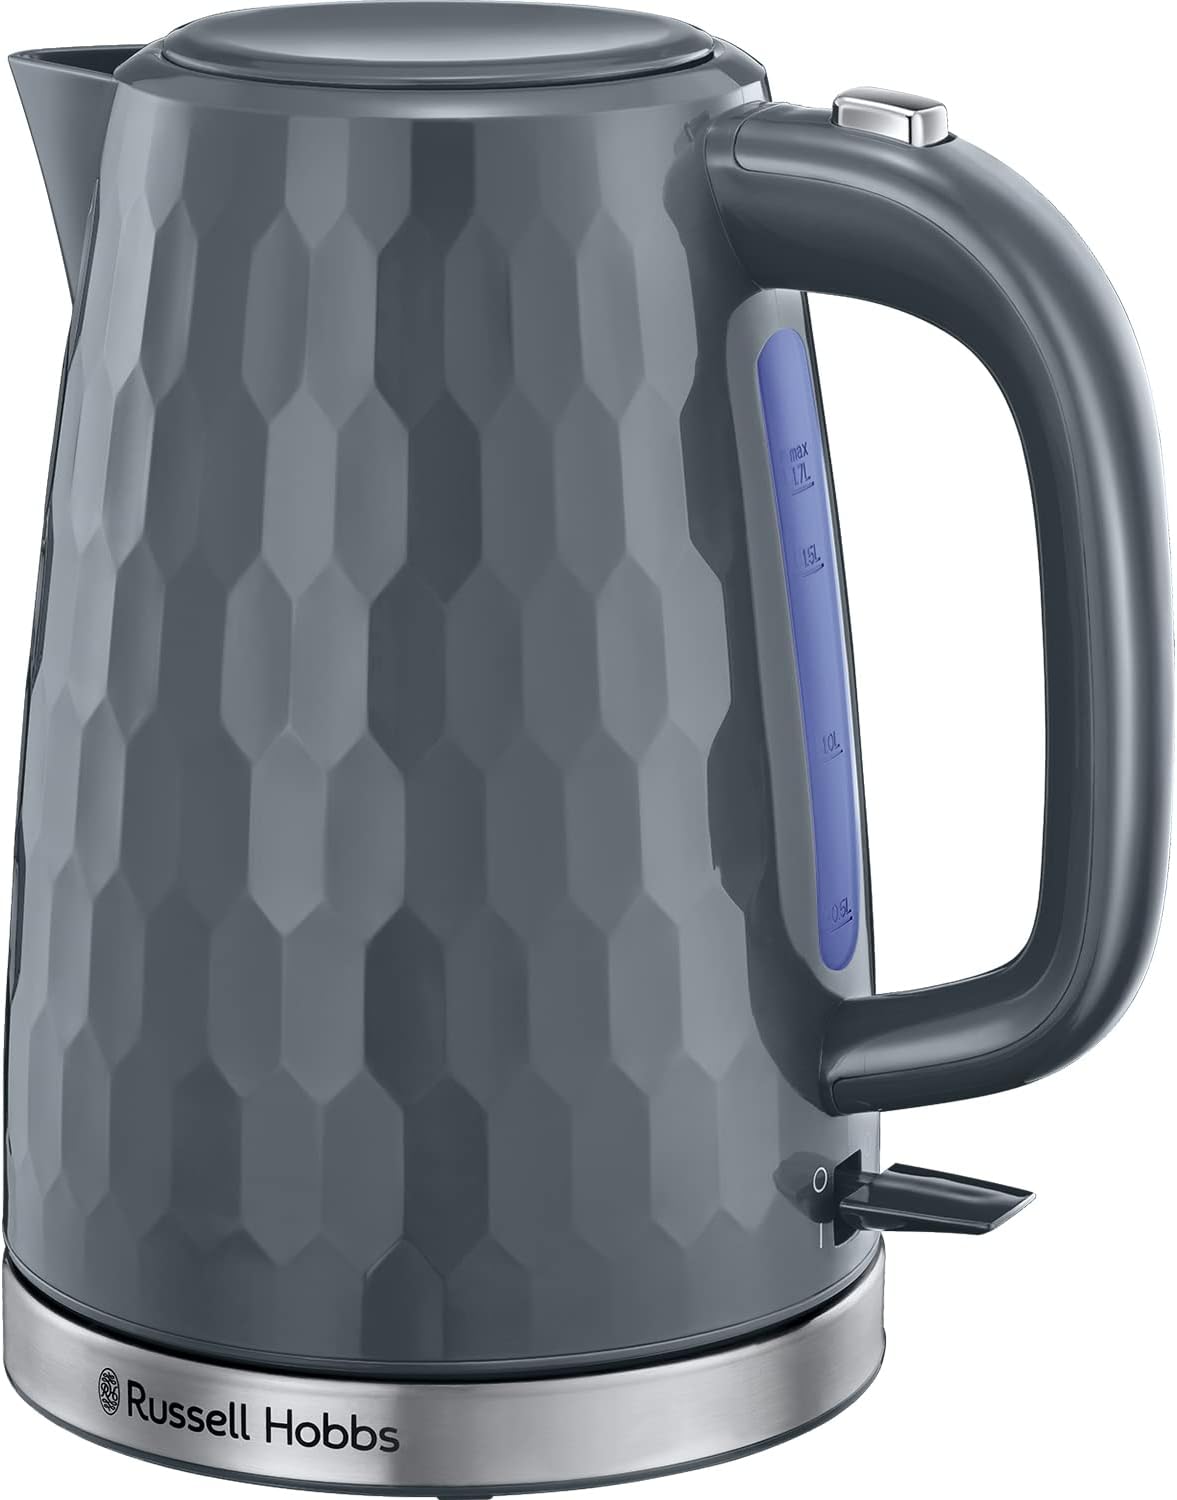 Russell Hobbs Honeycomb Electric 1.7L Cordless Kettle (Fast Boil 3KW, Grey premium plastic, matt & high gloss finish, Removable washable anti - scale filter, Push button lid, Perfect pour spout) 26053 - Amazing Gadgets Outlet